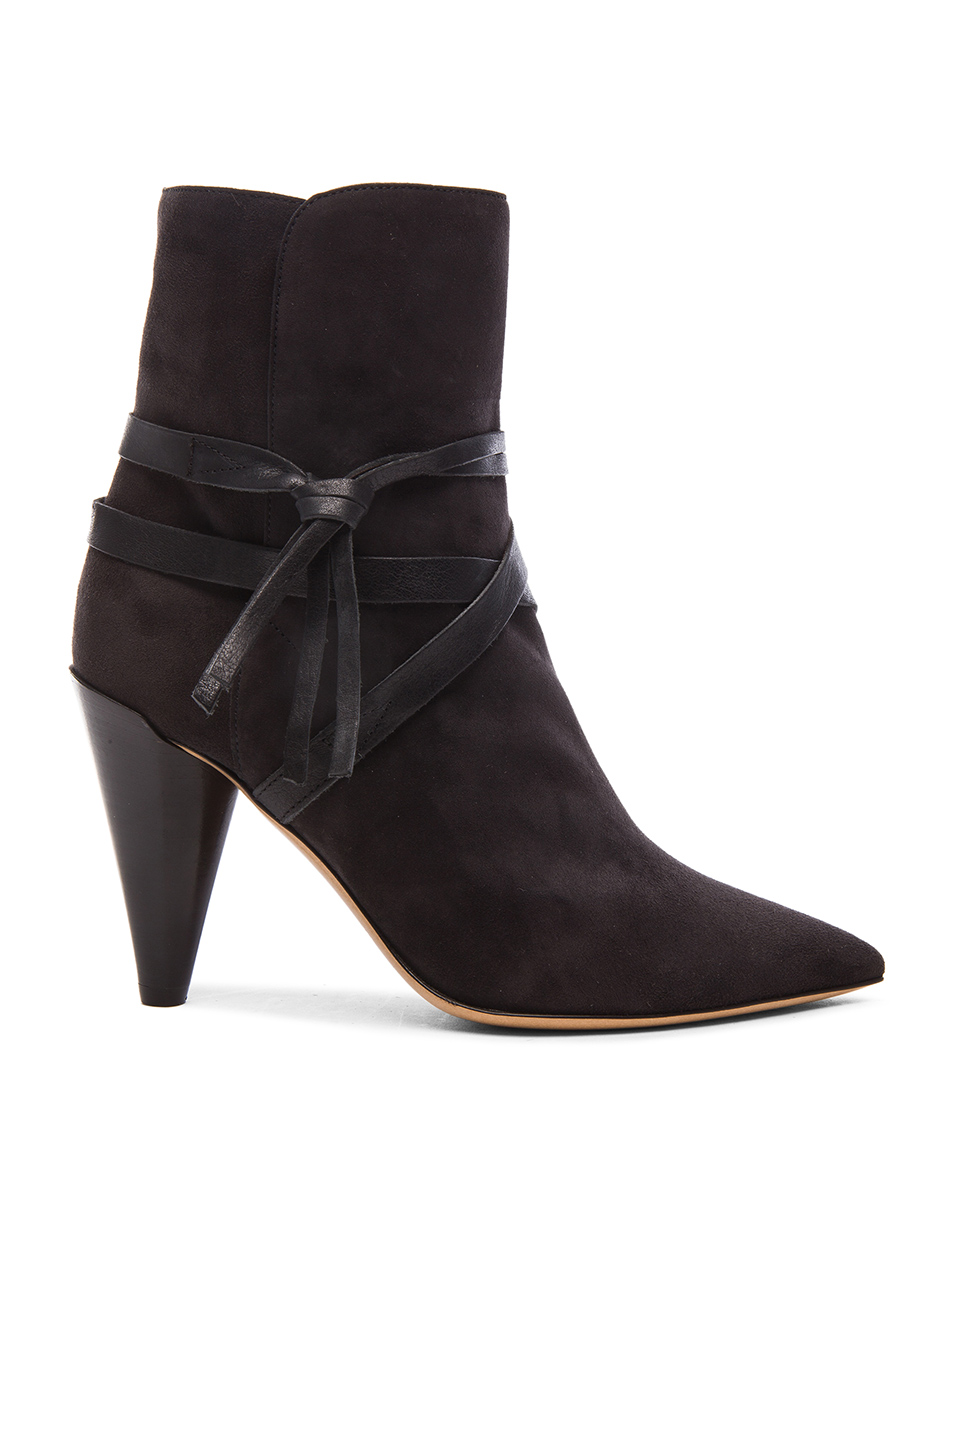 ISABEL MARANT CHARCOAL SUEDE STRAPPED NERYS BOOTS, FADED BLACK | ModeSens